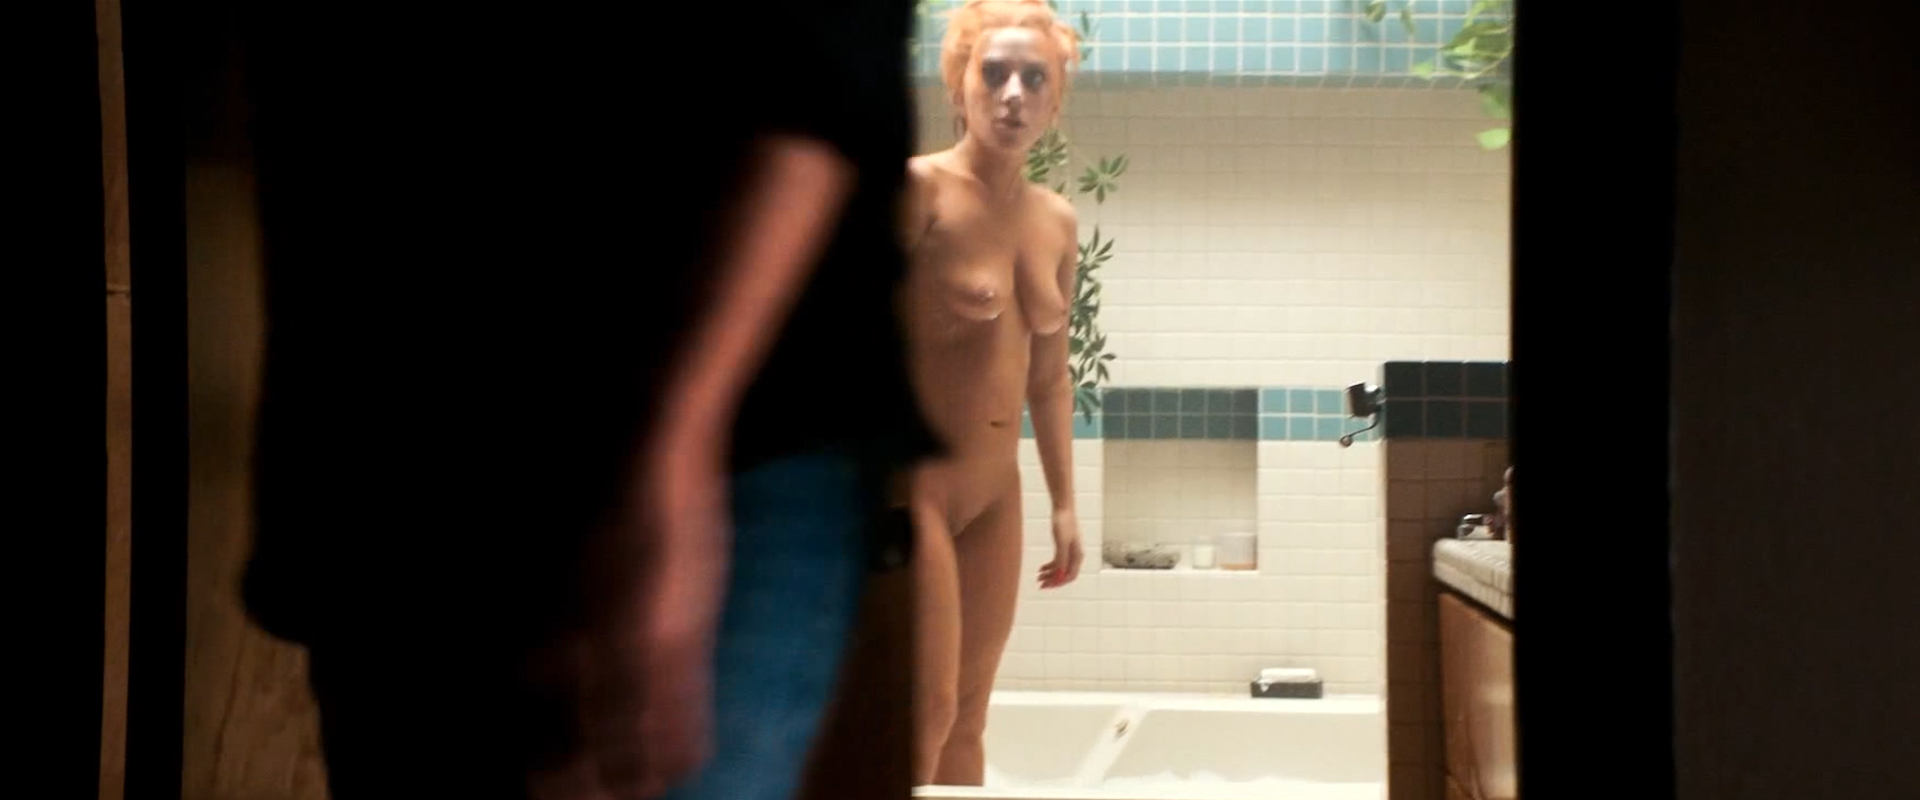 A star is born nude